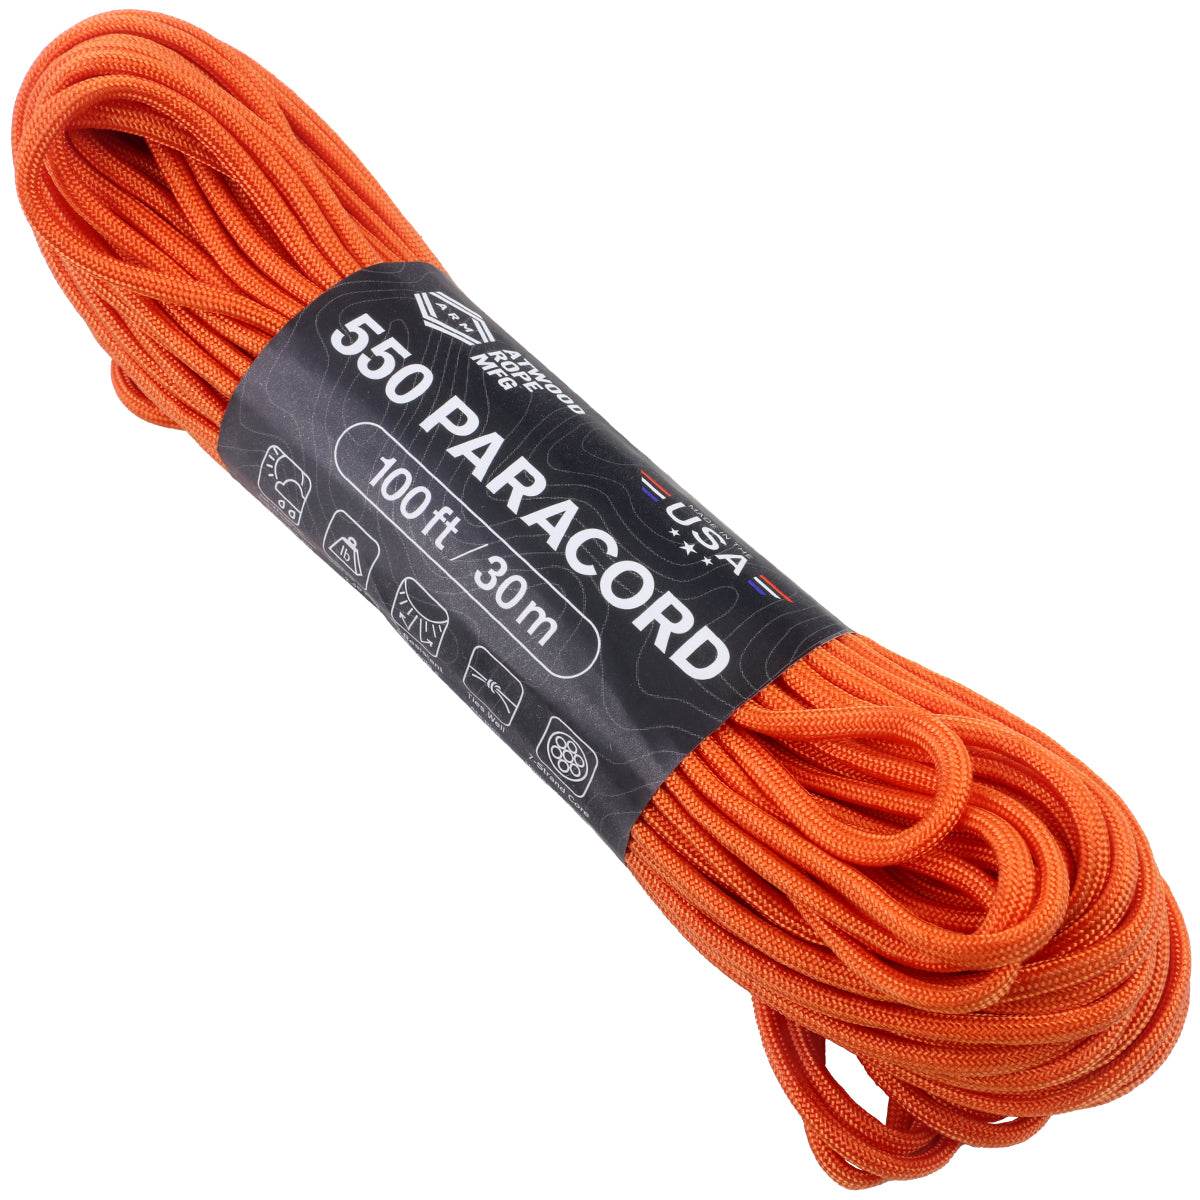 Red 275 Cord 5 Strand Paracord - 100 Feet